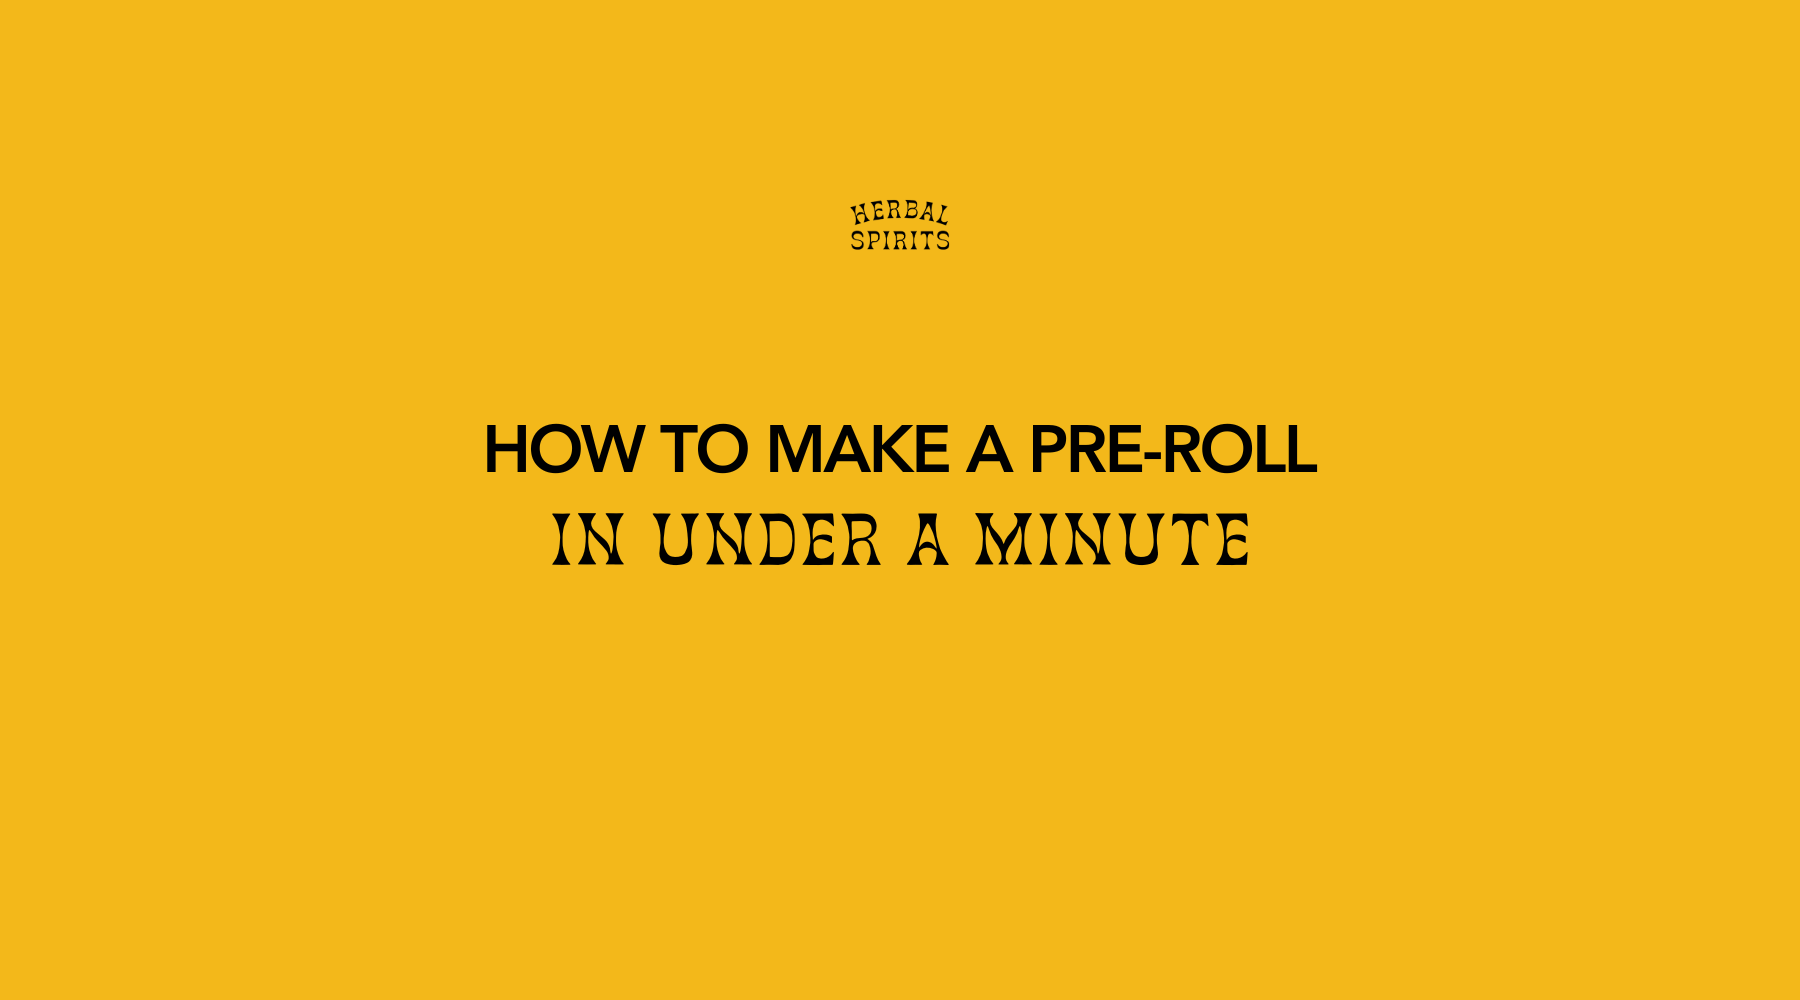 How To Make A Pre-Roll In UNDER A MINUTE With A C-ONE Single Cone Filler & The Included Tamping Tool